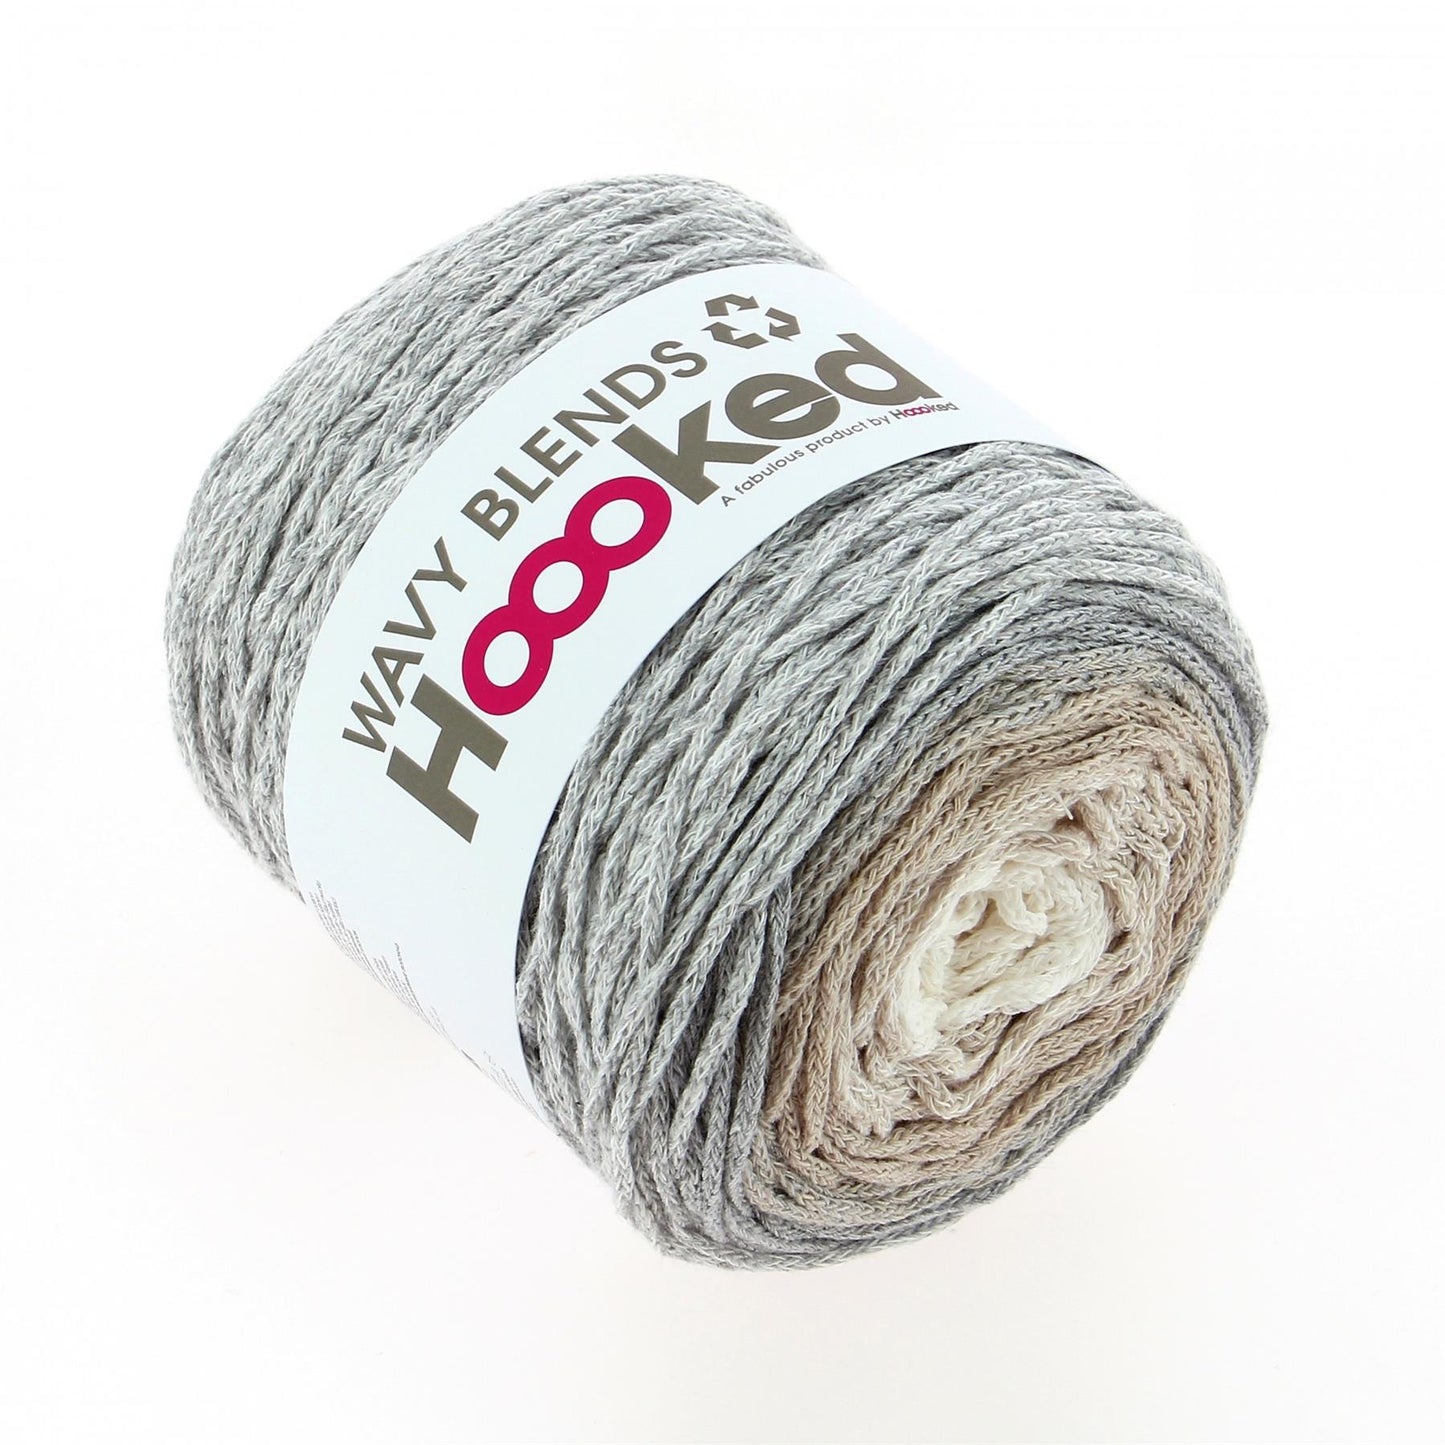 [Hoooked] WB08 Wavy Blends Sandy Grey Recycled Cotton Yarn - 260M, 250g